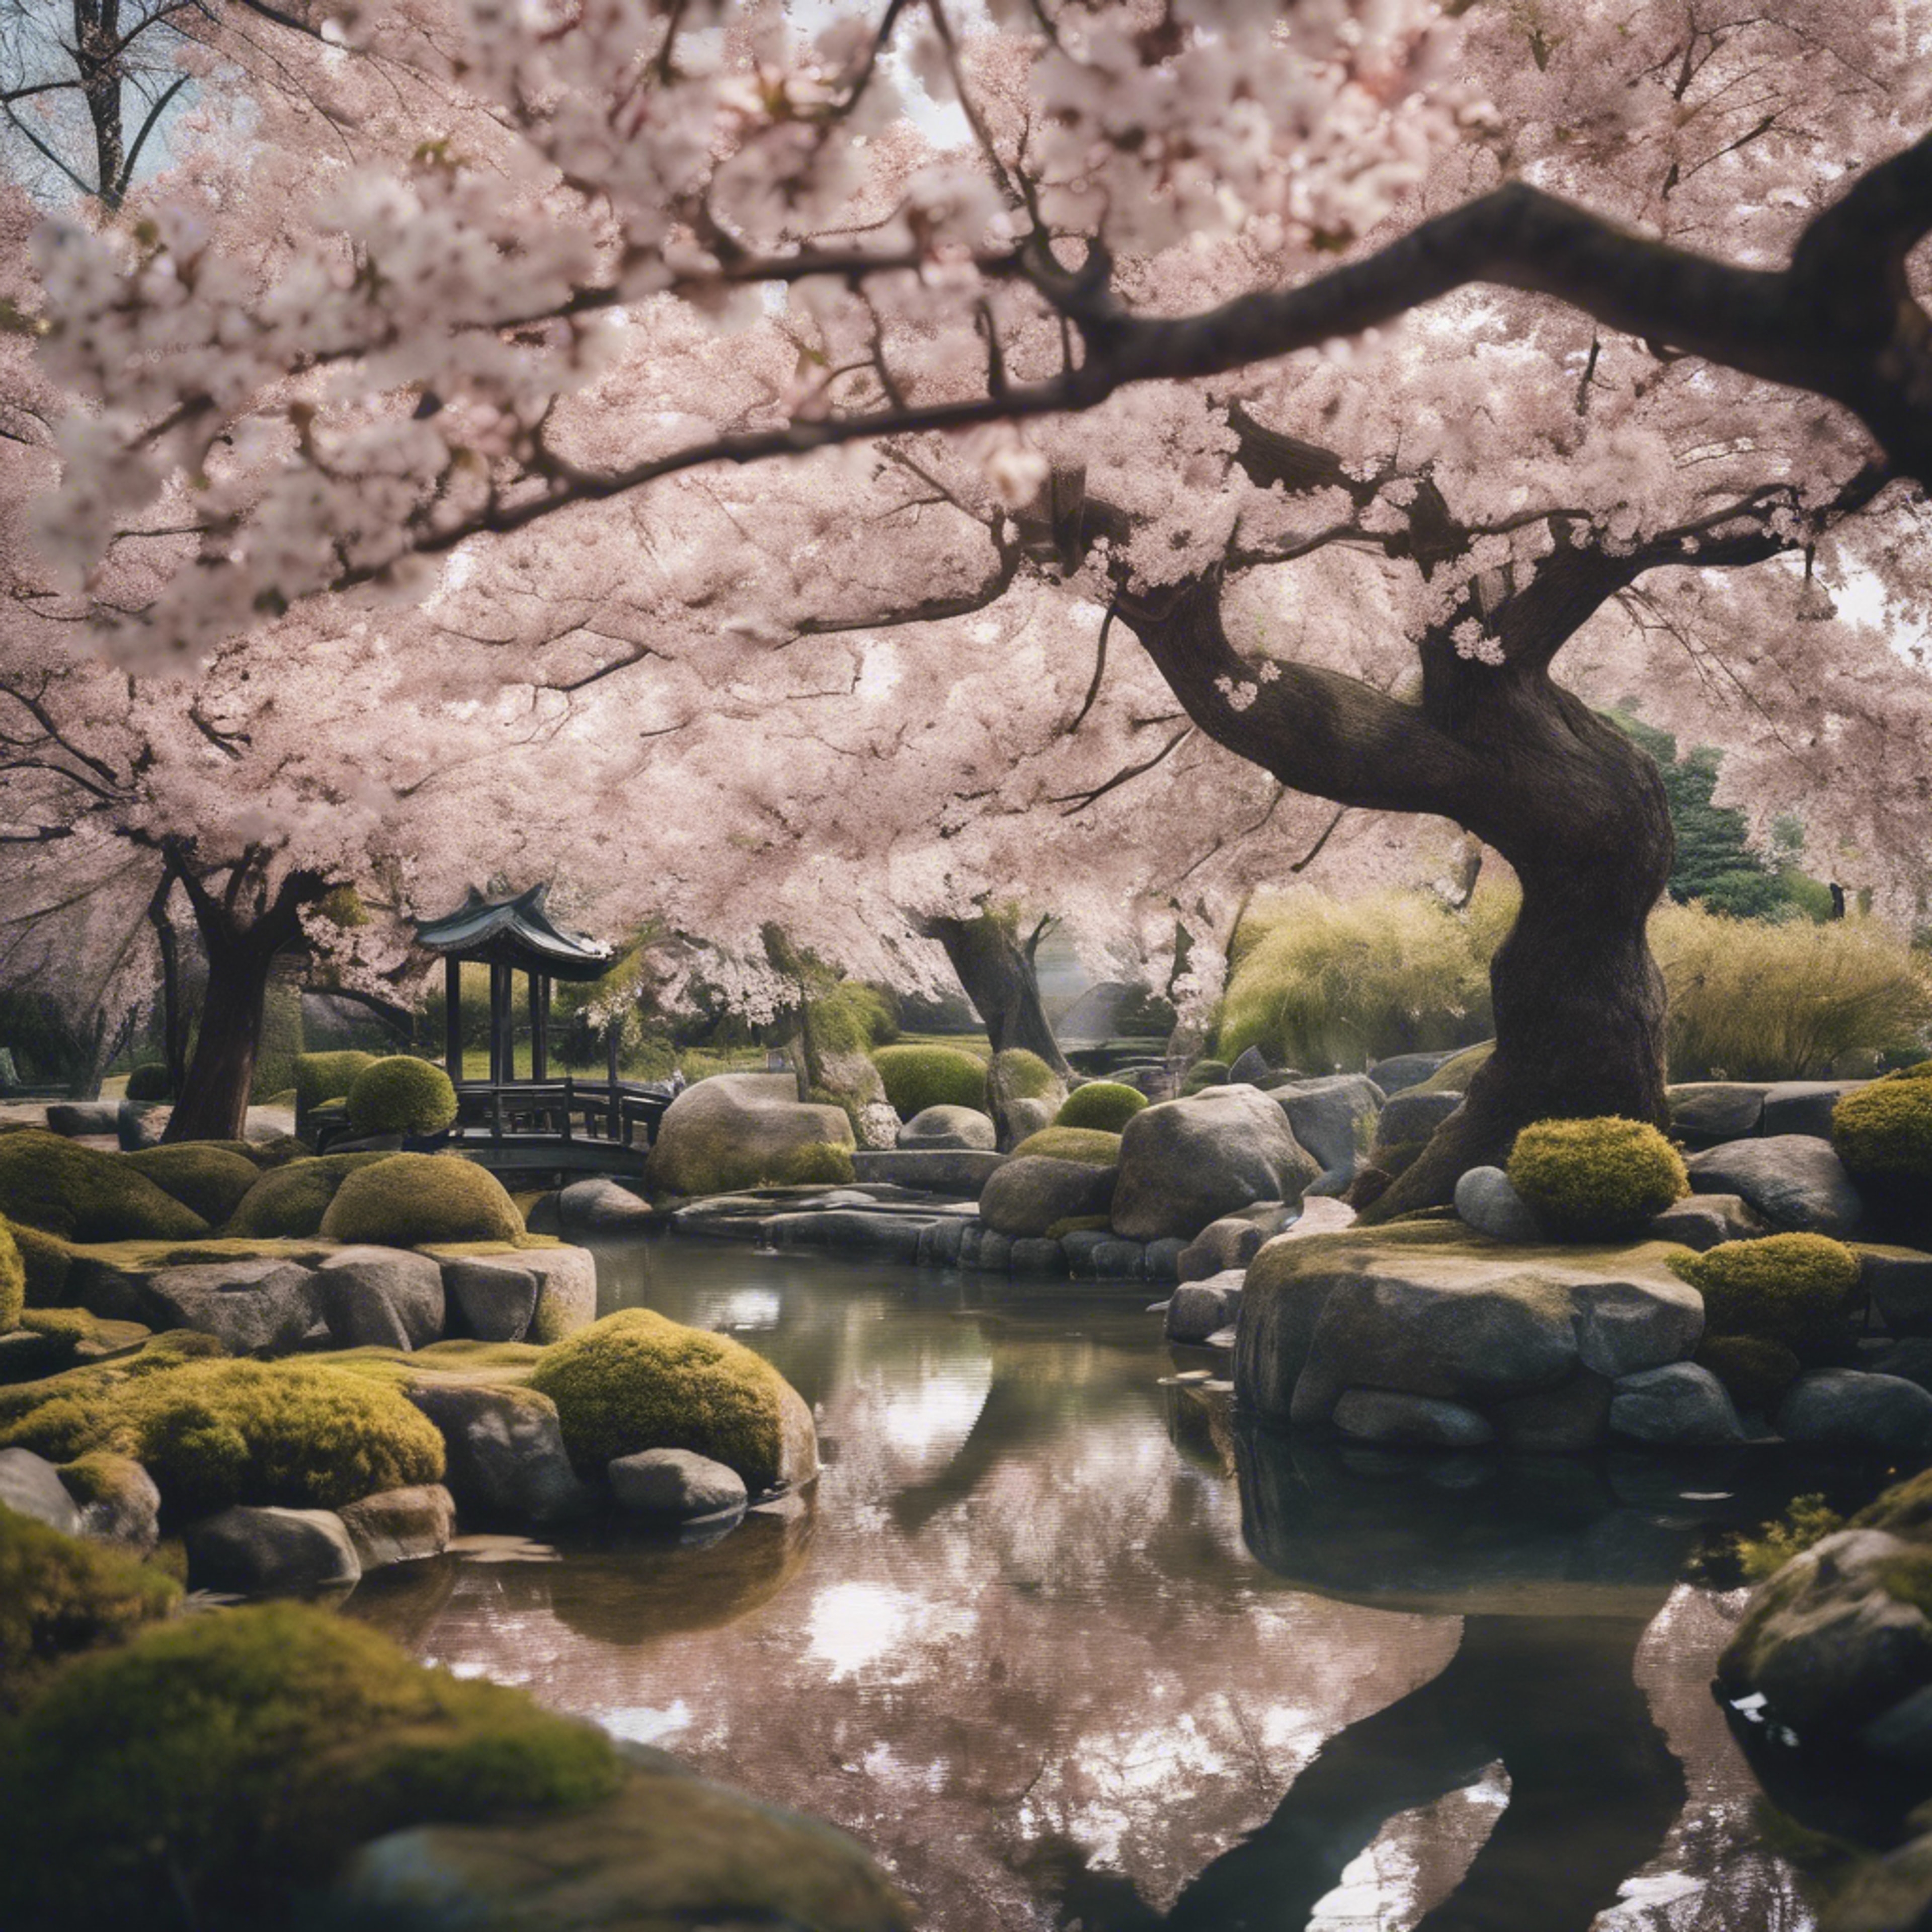 A wide-angle view of a serene Japanese garden with cherry blossoms in full bloom. Tapeta[cf6d4e9694a4479cb5ff]